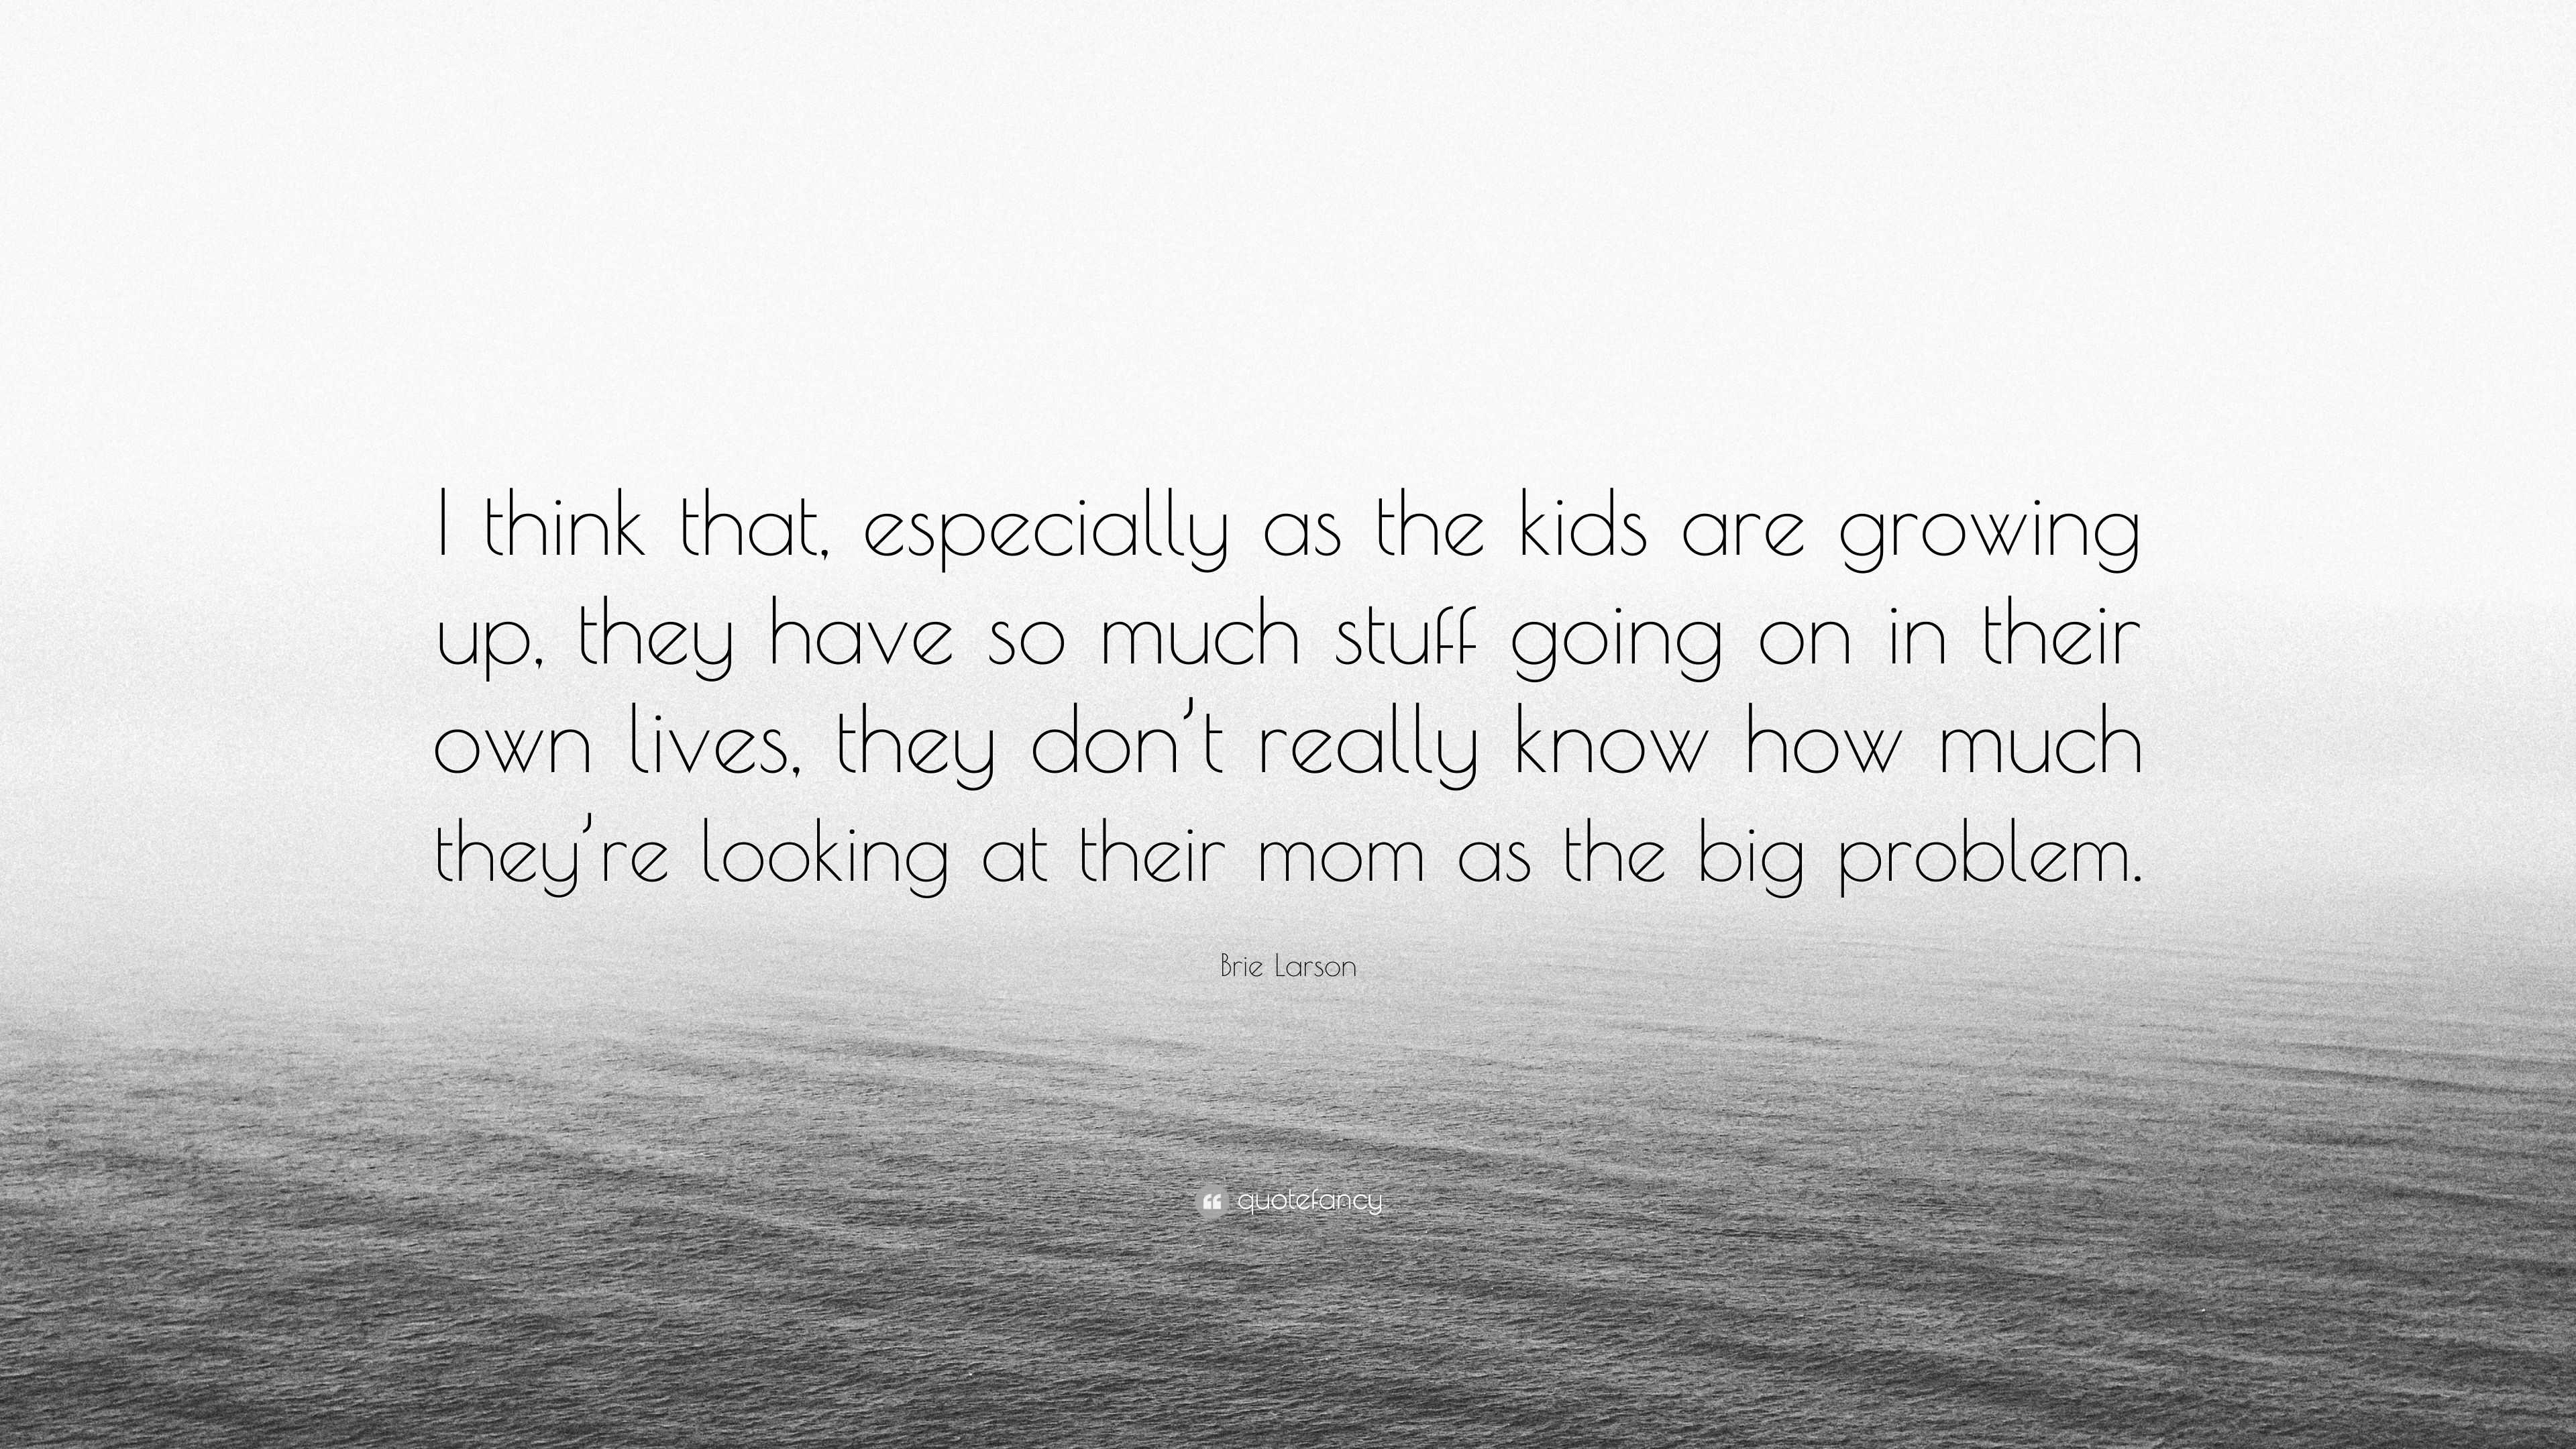 Here's Why It's So Hard To Think About Our Kids Growing Up